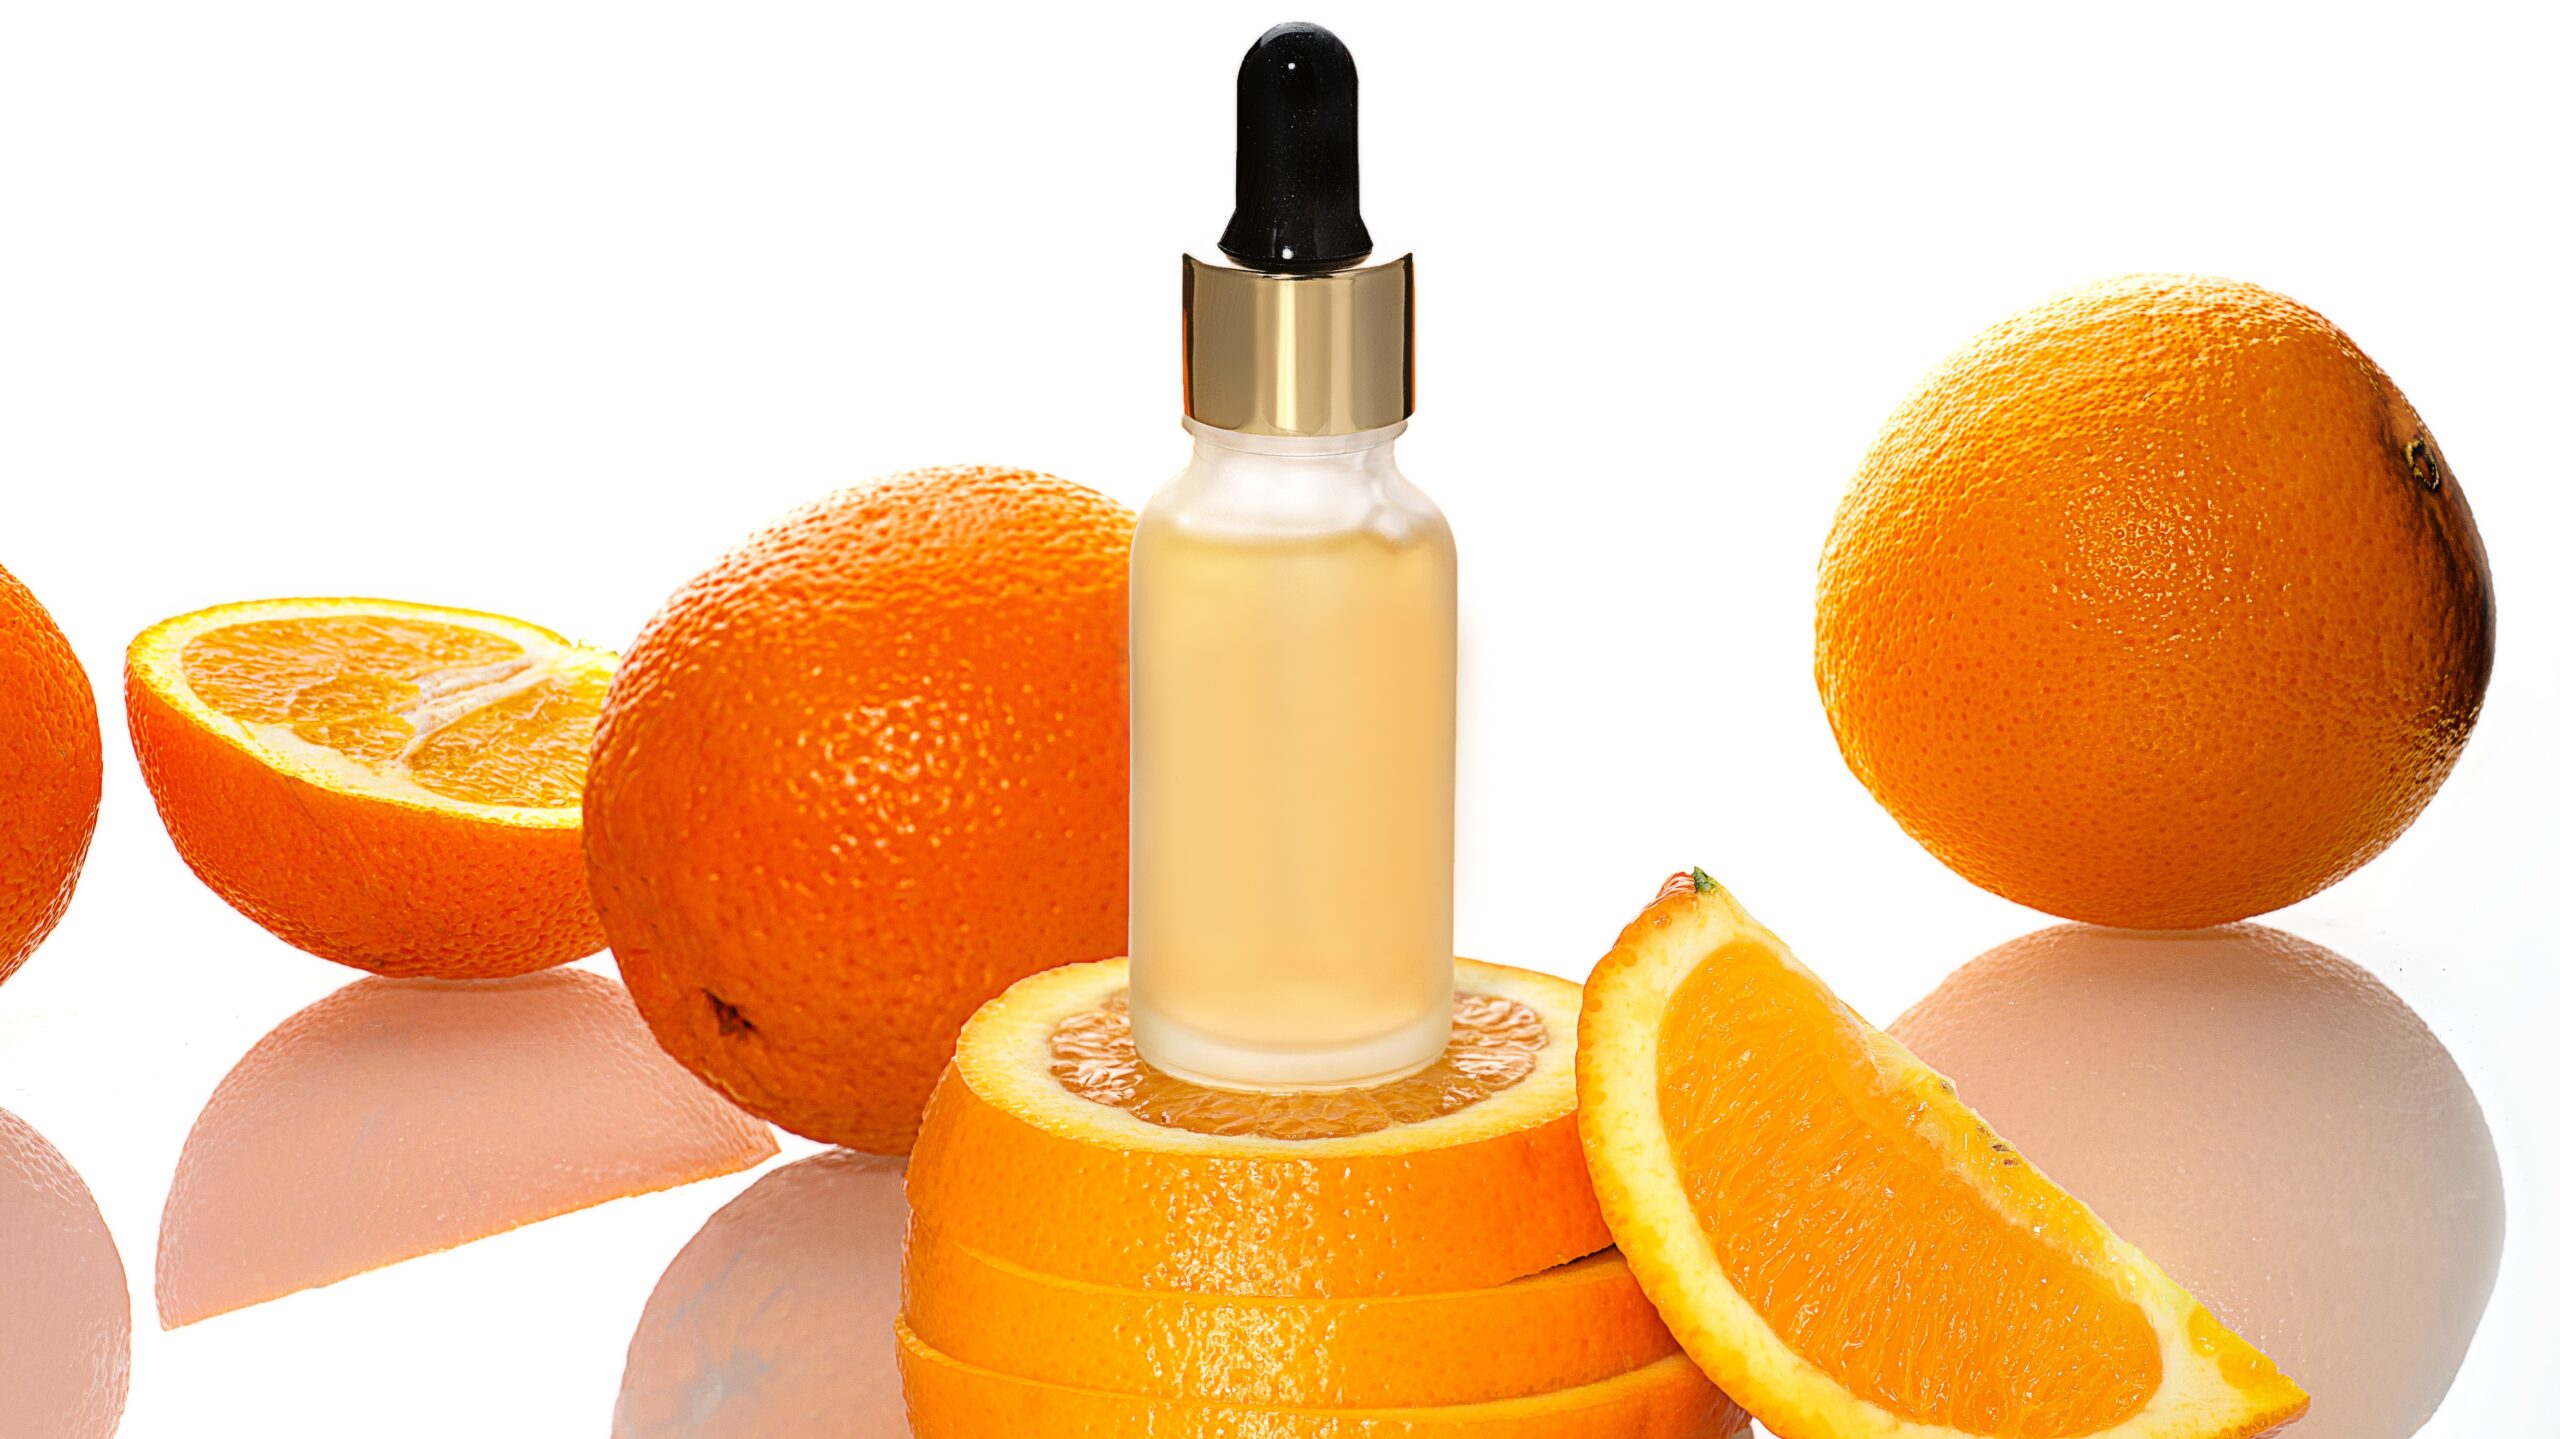 Vitamin C Is The Ingredient You Didn’t Know Your Skin Care Routine Needed